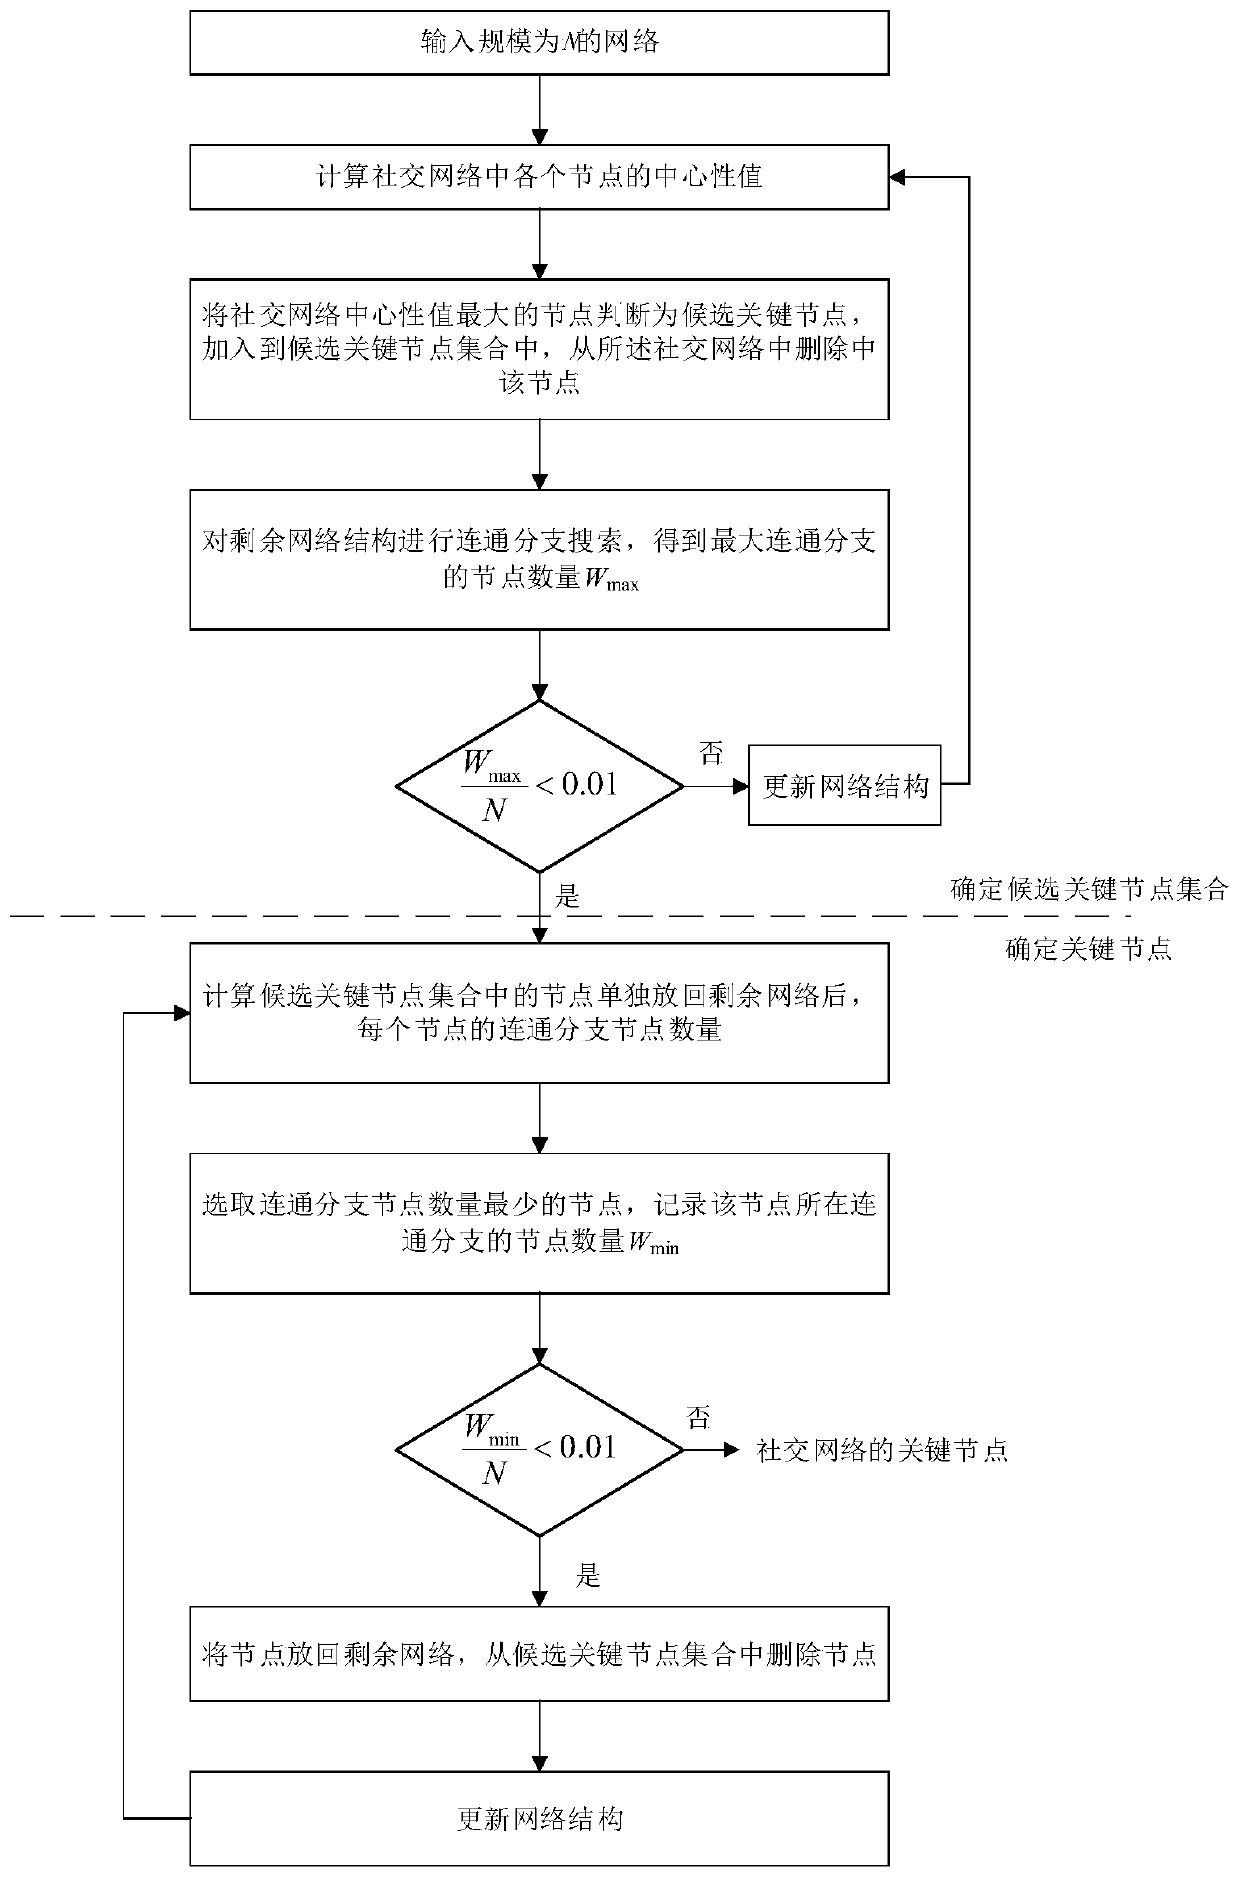 Method and system for discovering key nodes of social network based on network decomposition